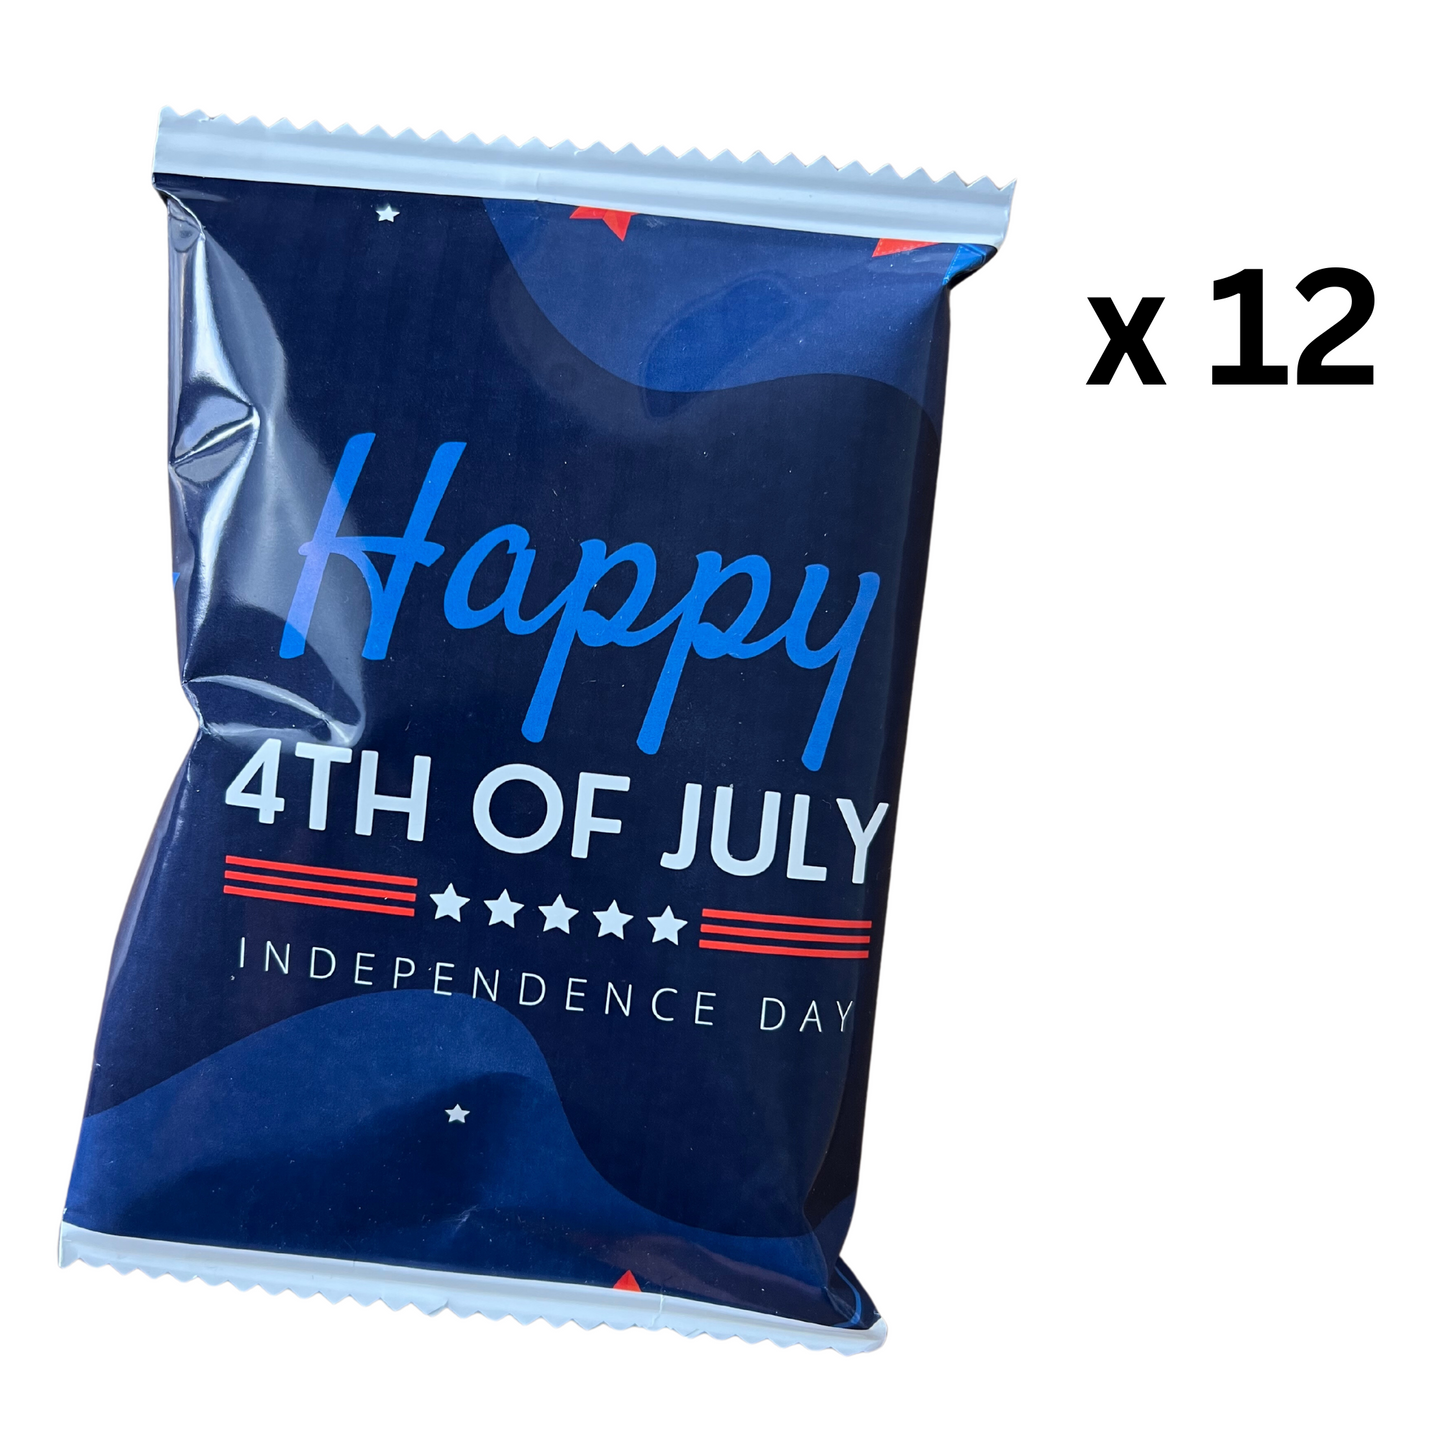 Chip size Party Bags (12 units per pack) - UNFILLED